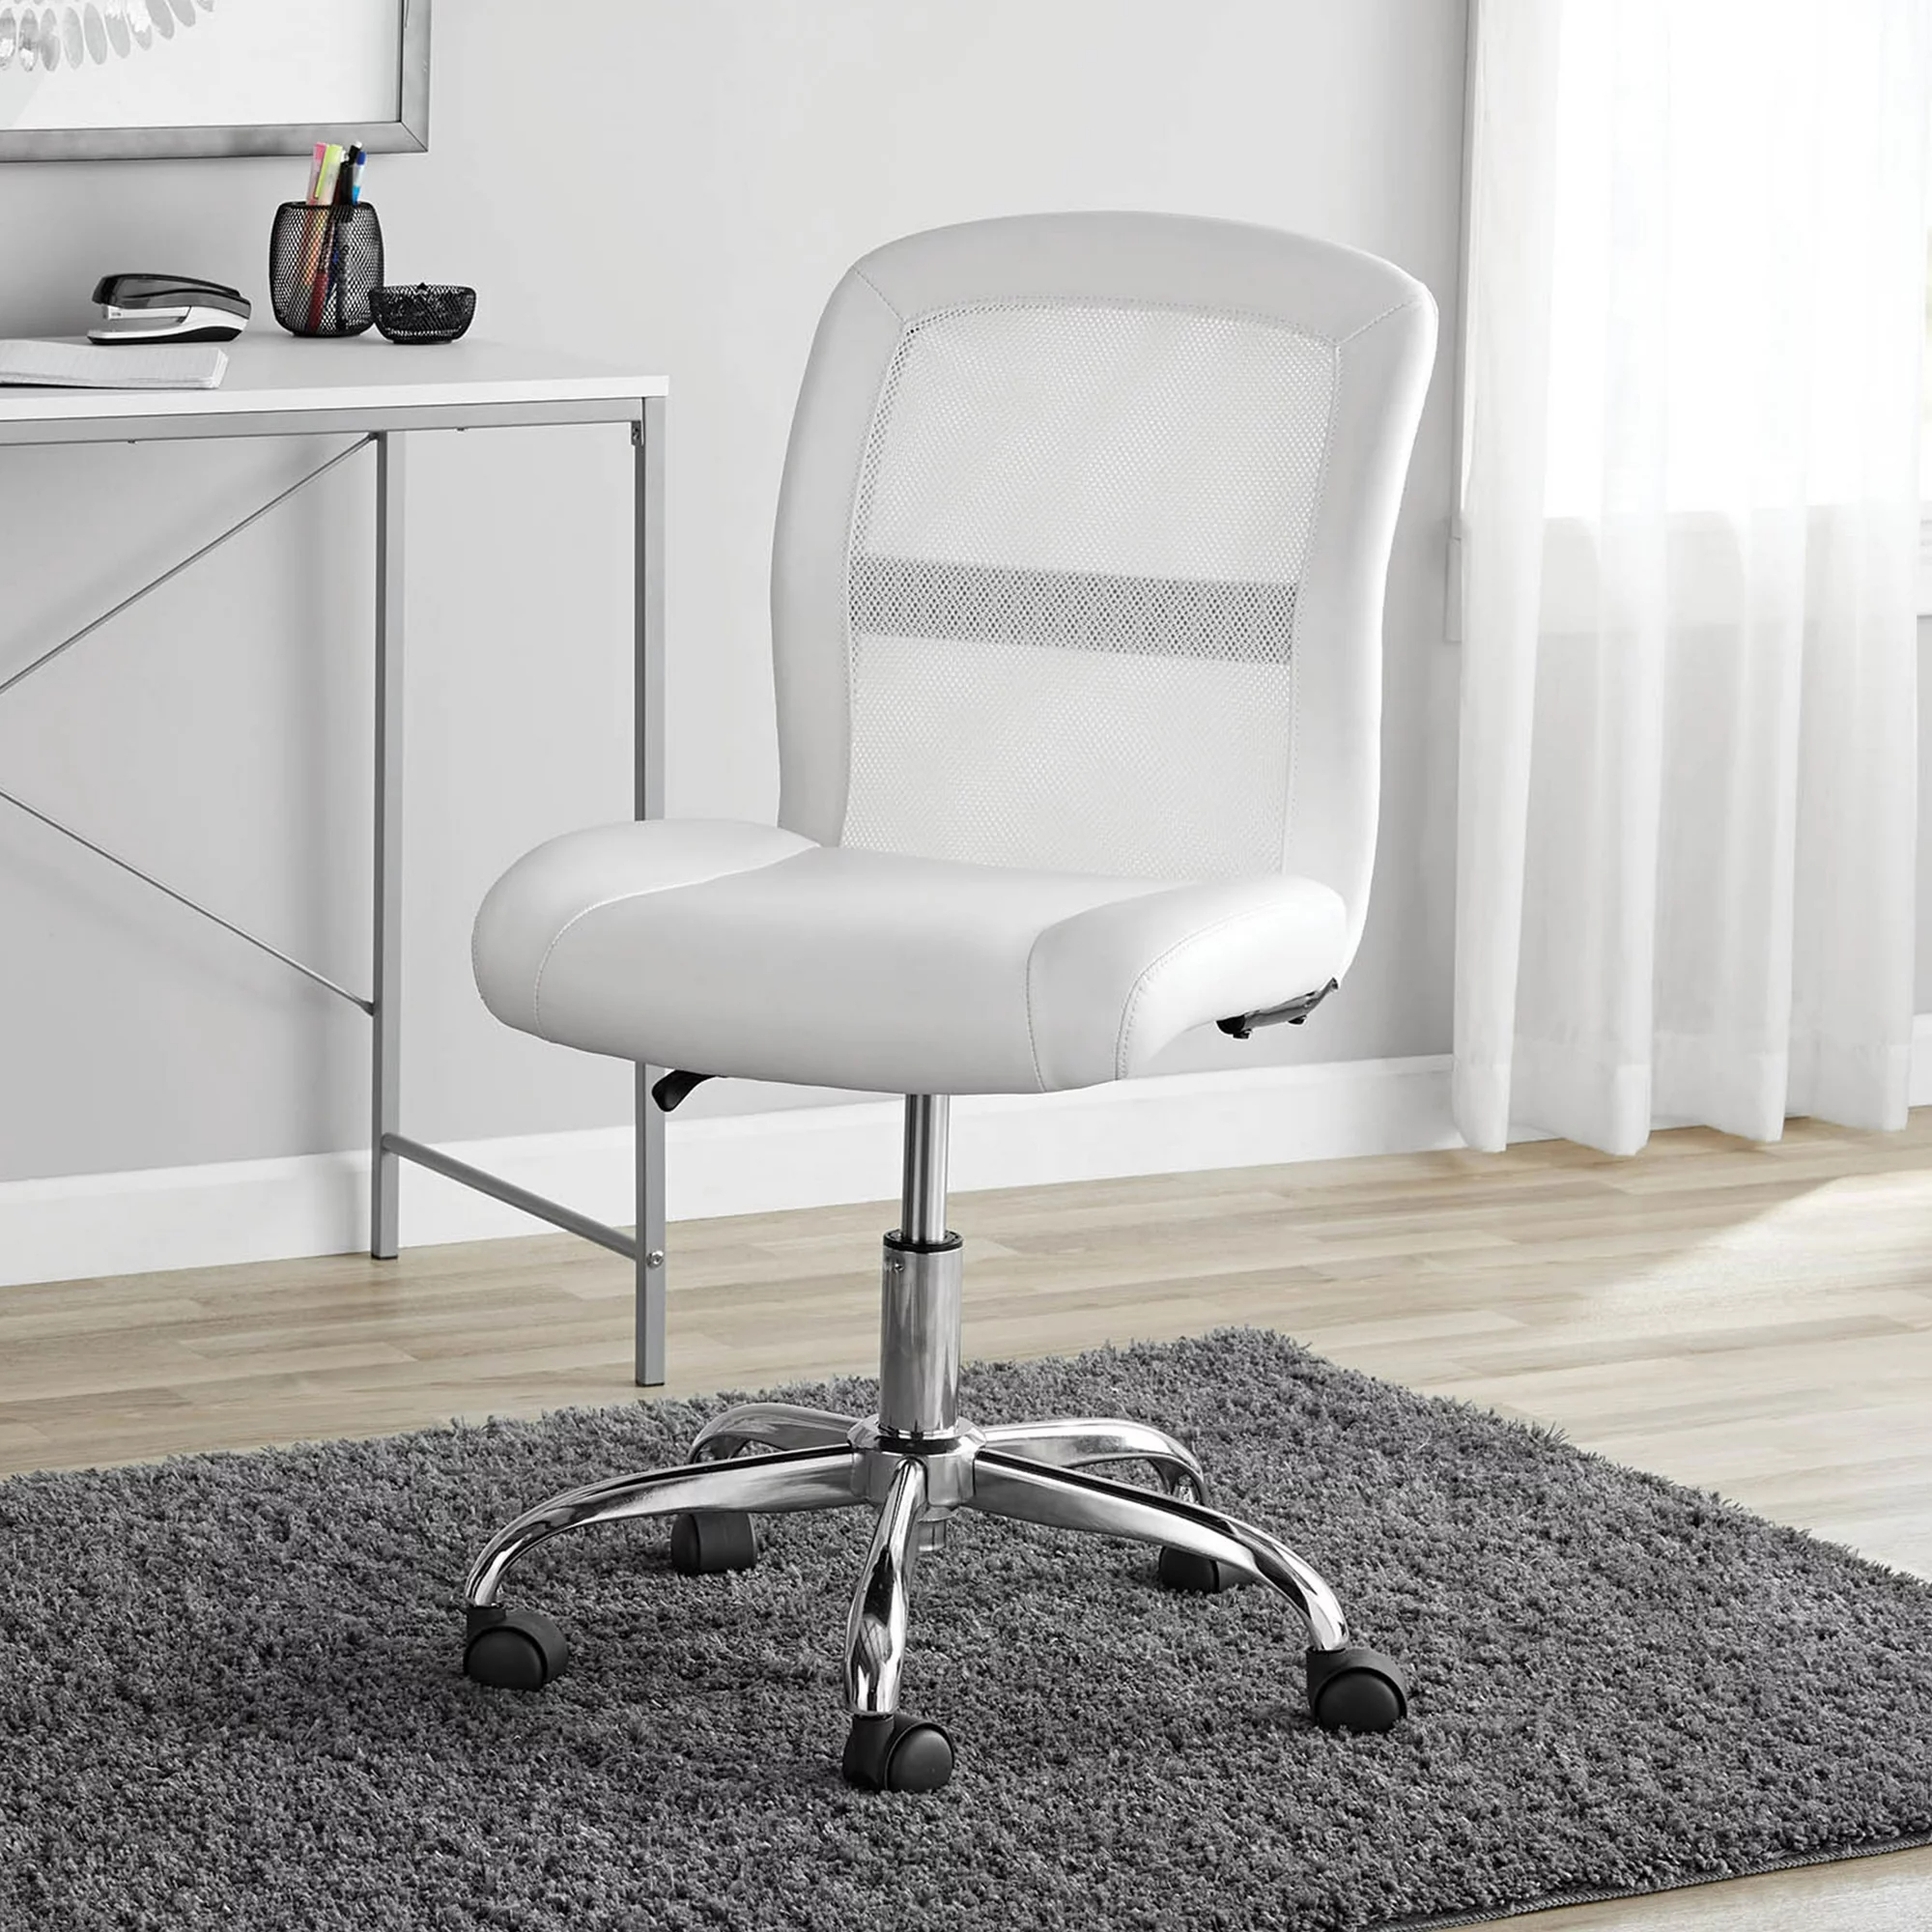 The office chair in the color White